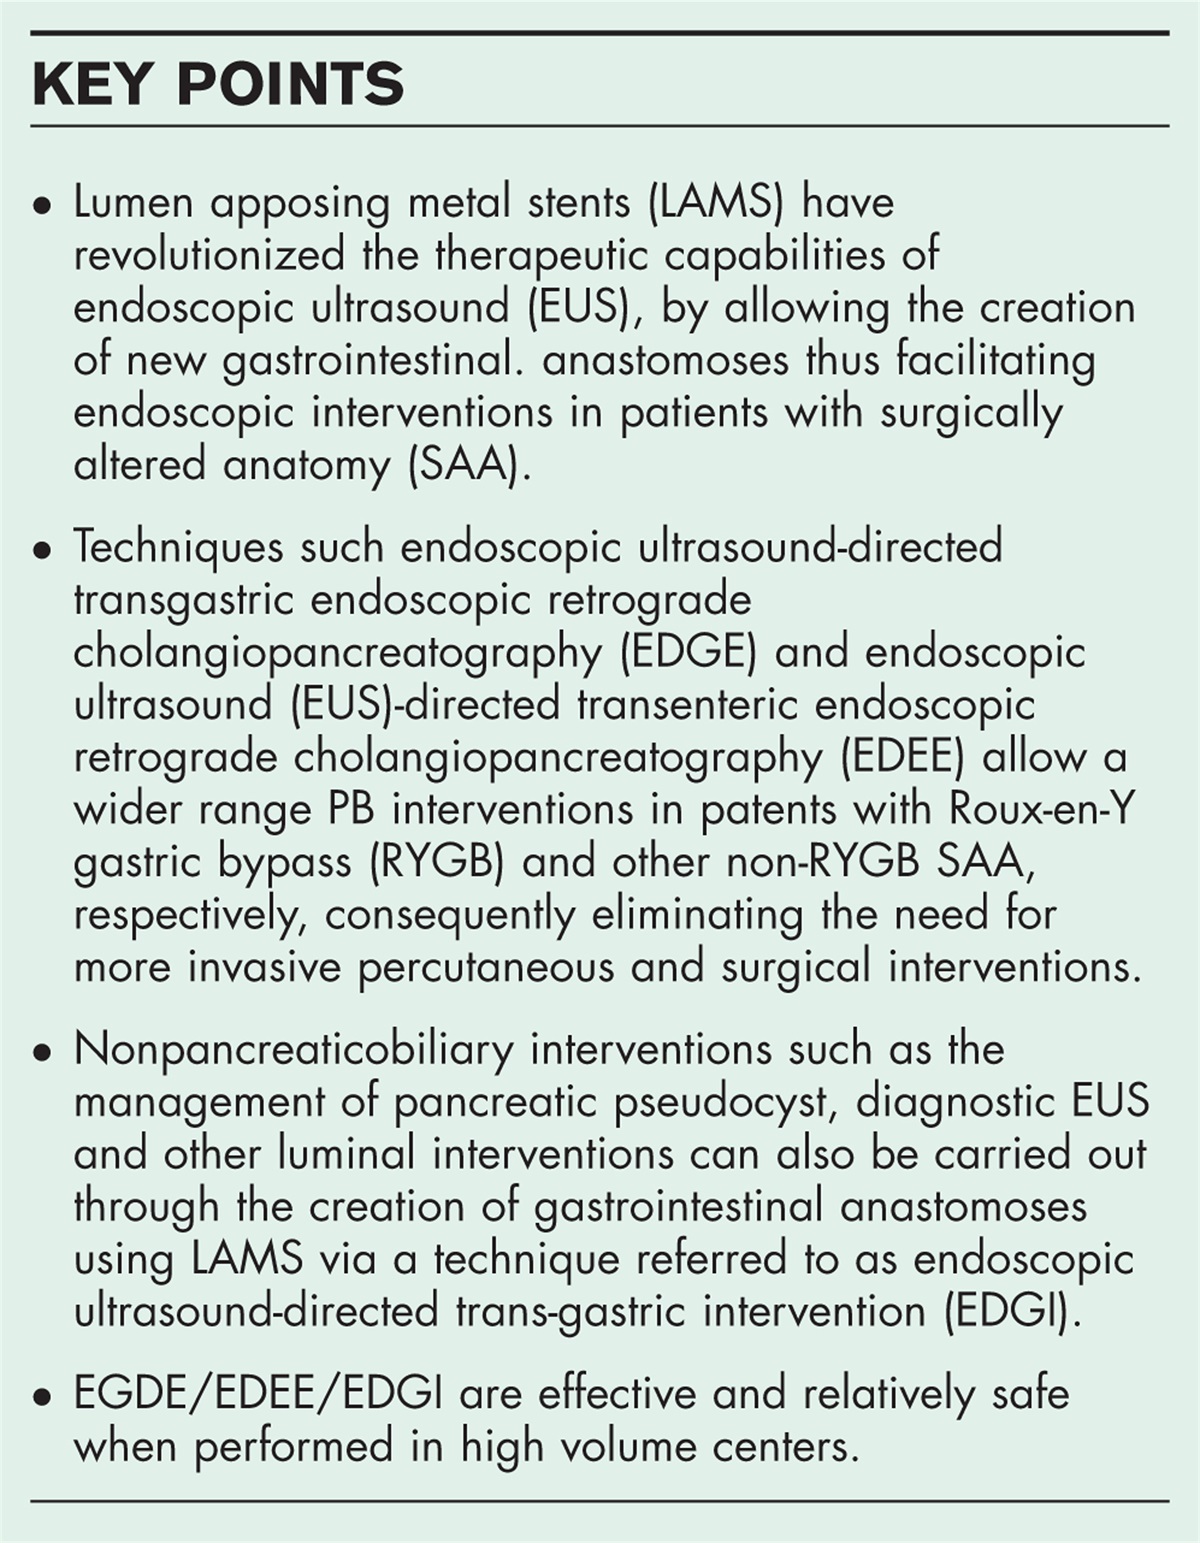 Use of lumen apposing metal stents in patients with altered gastrointestinal anatomy